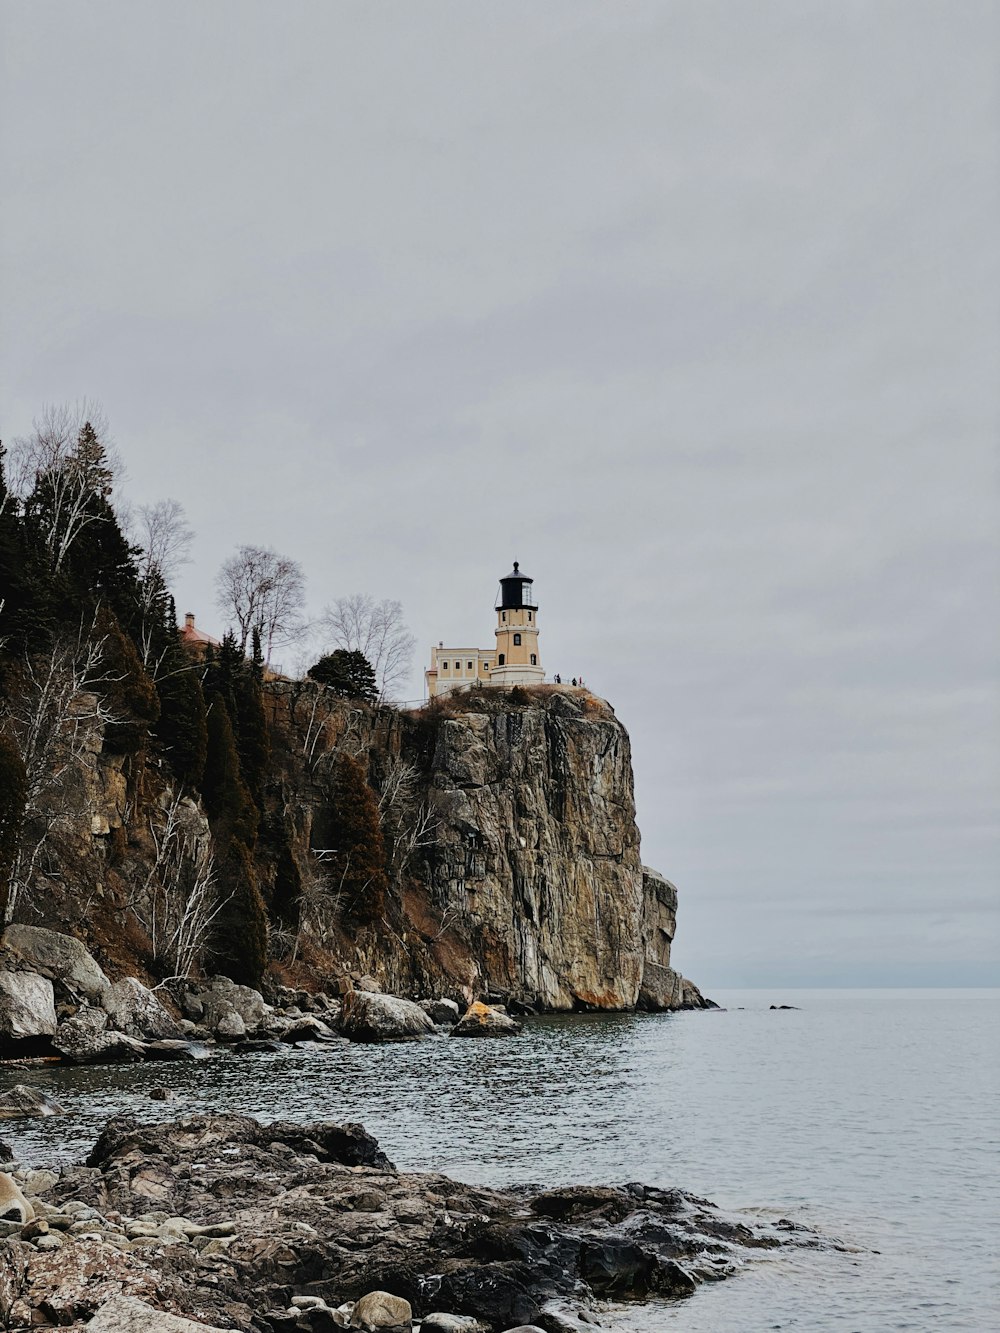 white lighthouse on brown rock formation near body of water during daytime